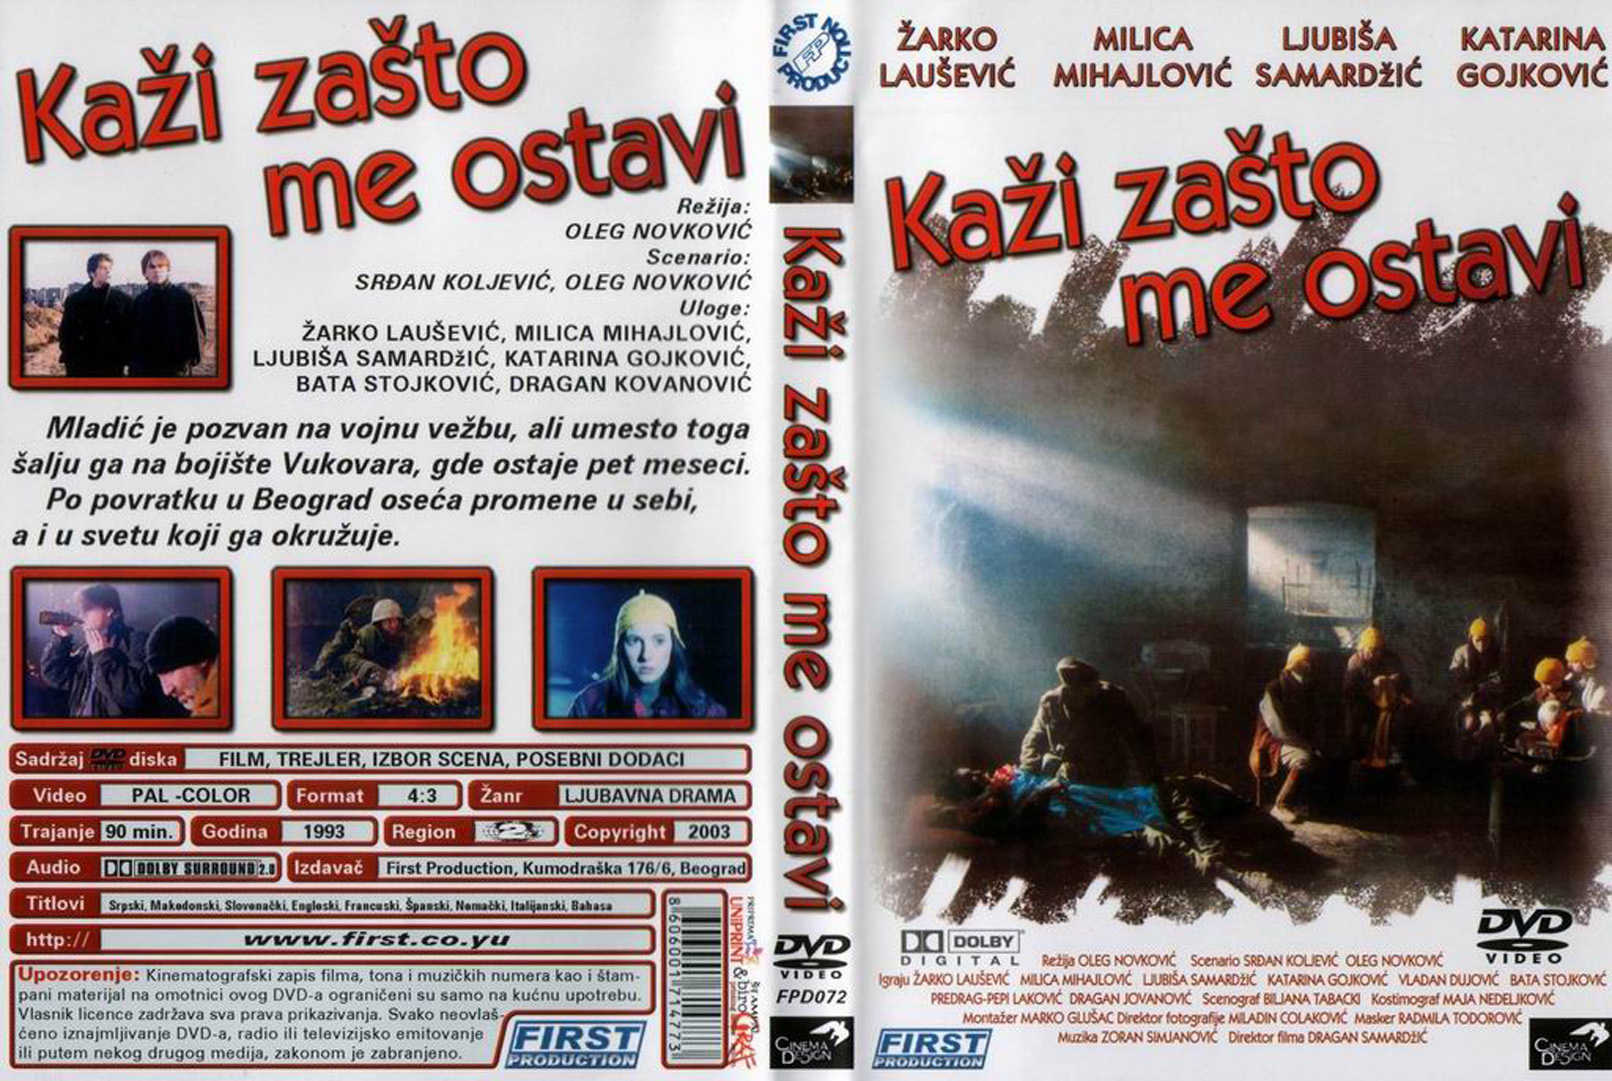 Click to view full size image -  DVD Cover - K - kazi_zasto_me_ostavi_dvd - kazi_zasto_me_ostavi_dvd.jpg